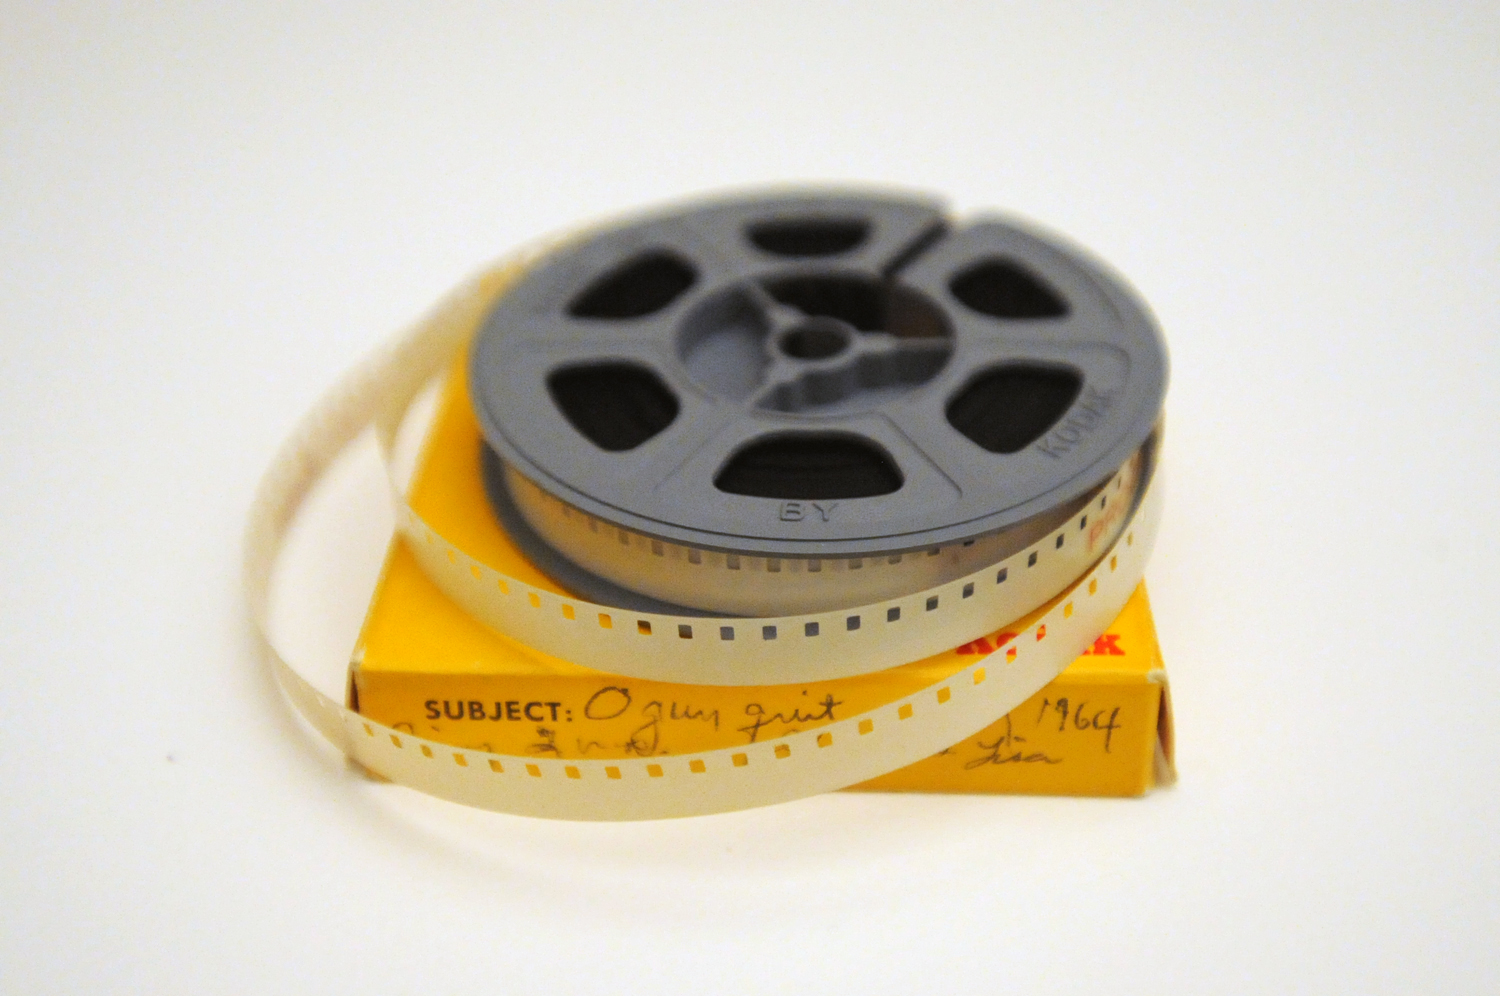 Smithsonian Collections Blog: The Summer of Super 8